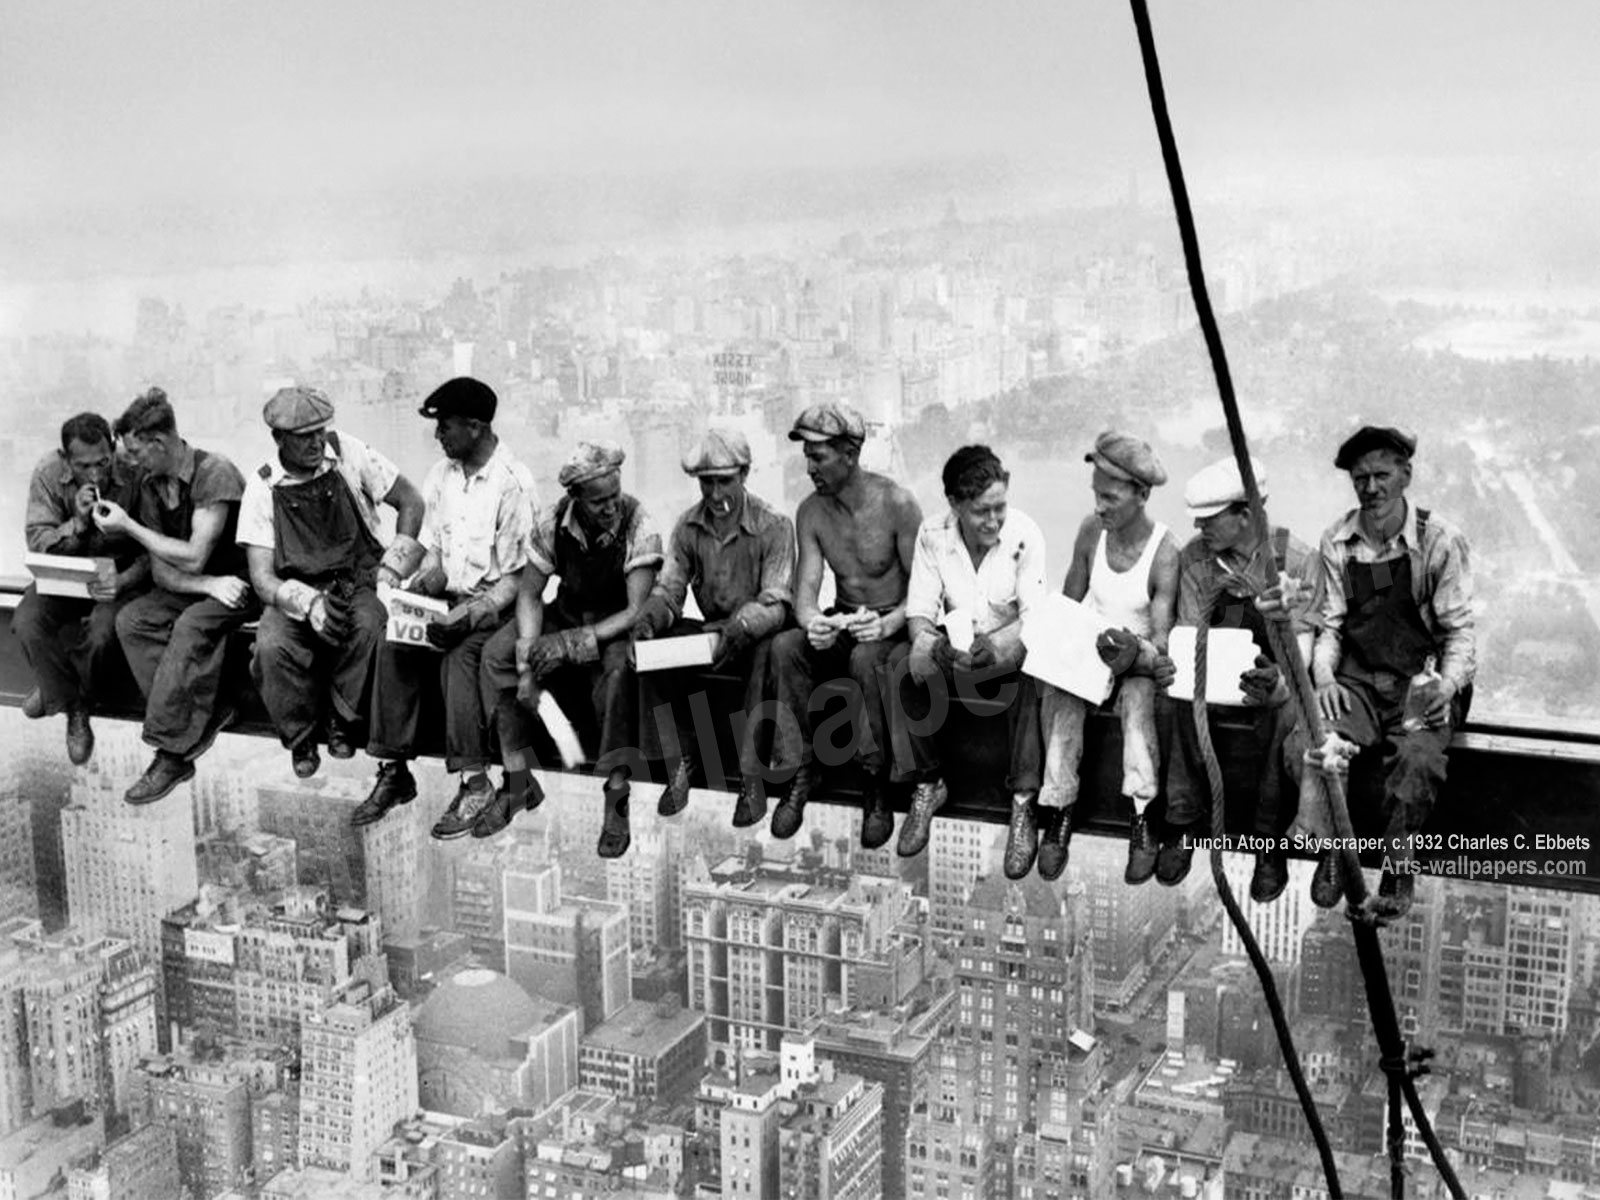 Lunch Atop A Skyscraper Wallpaper Charles C Ebbets